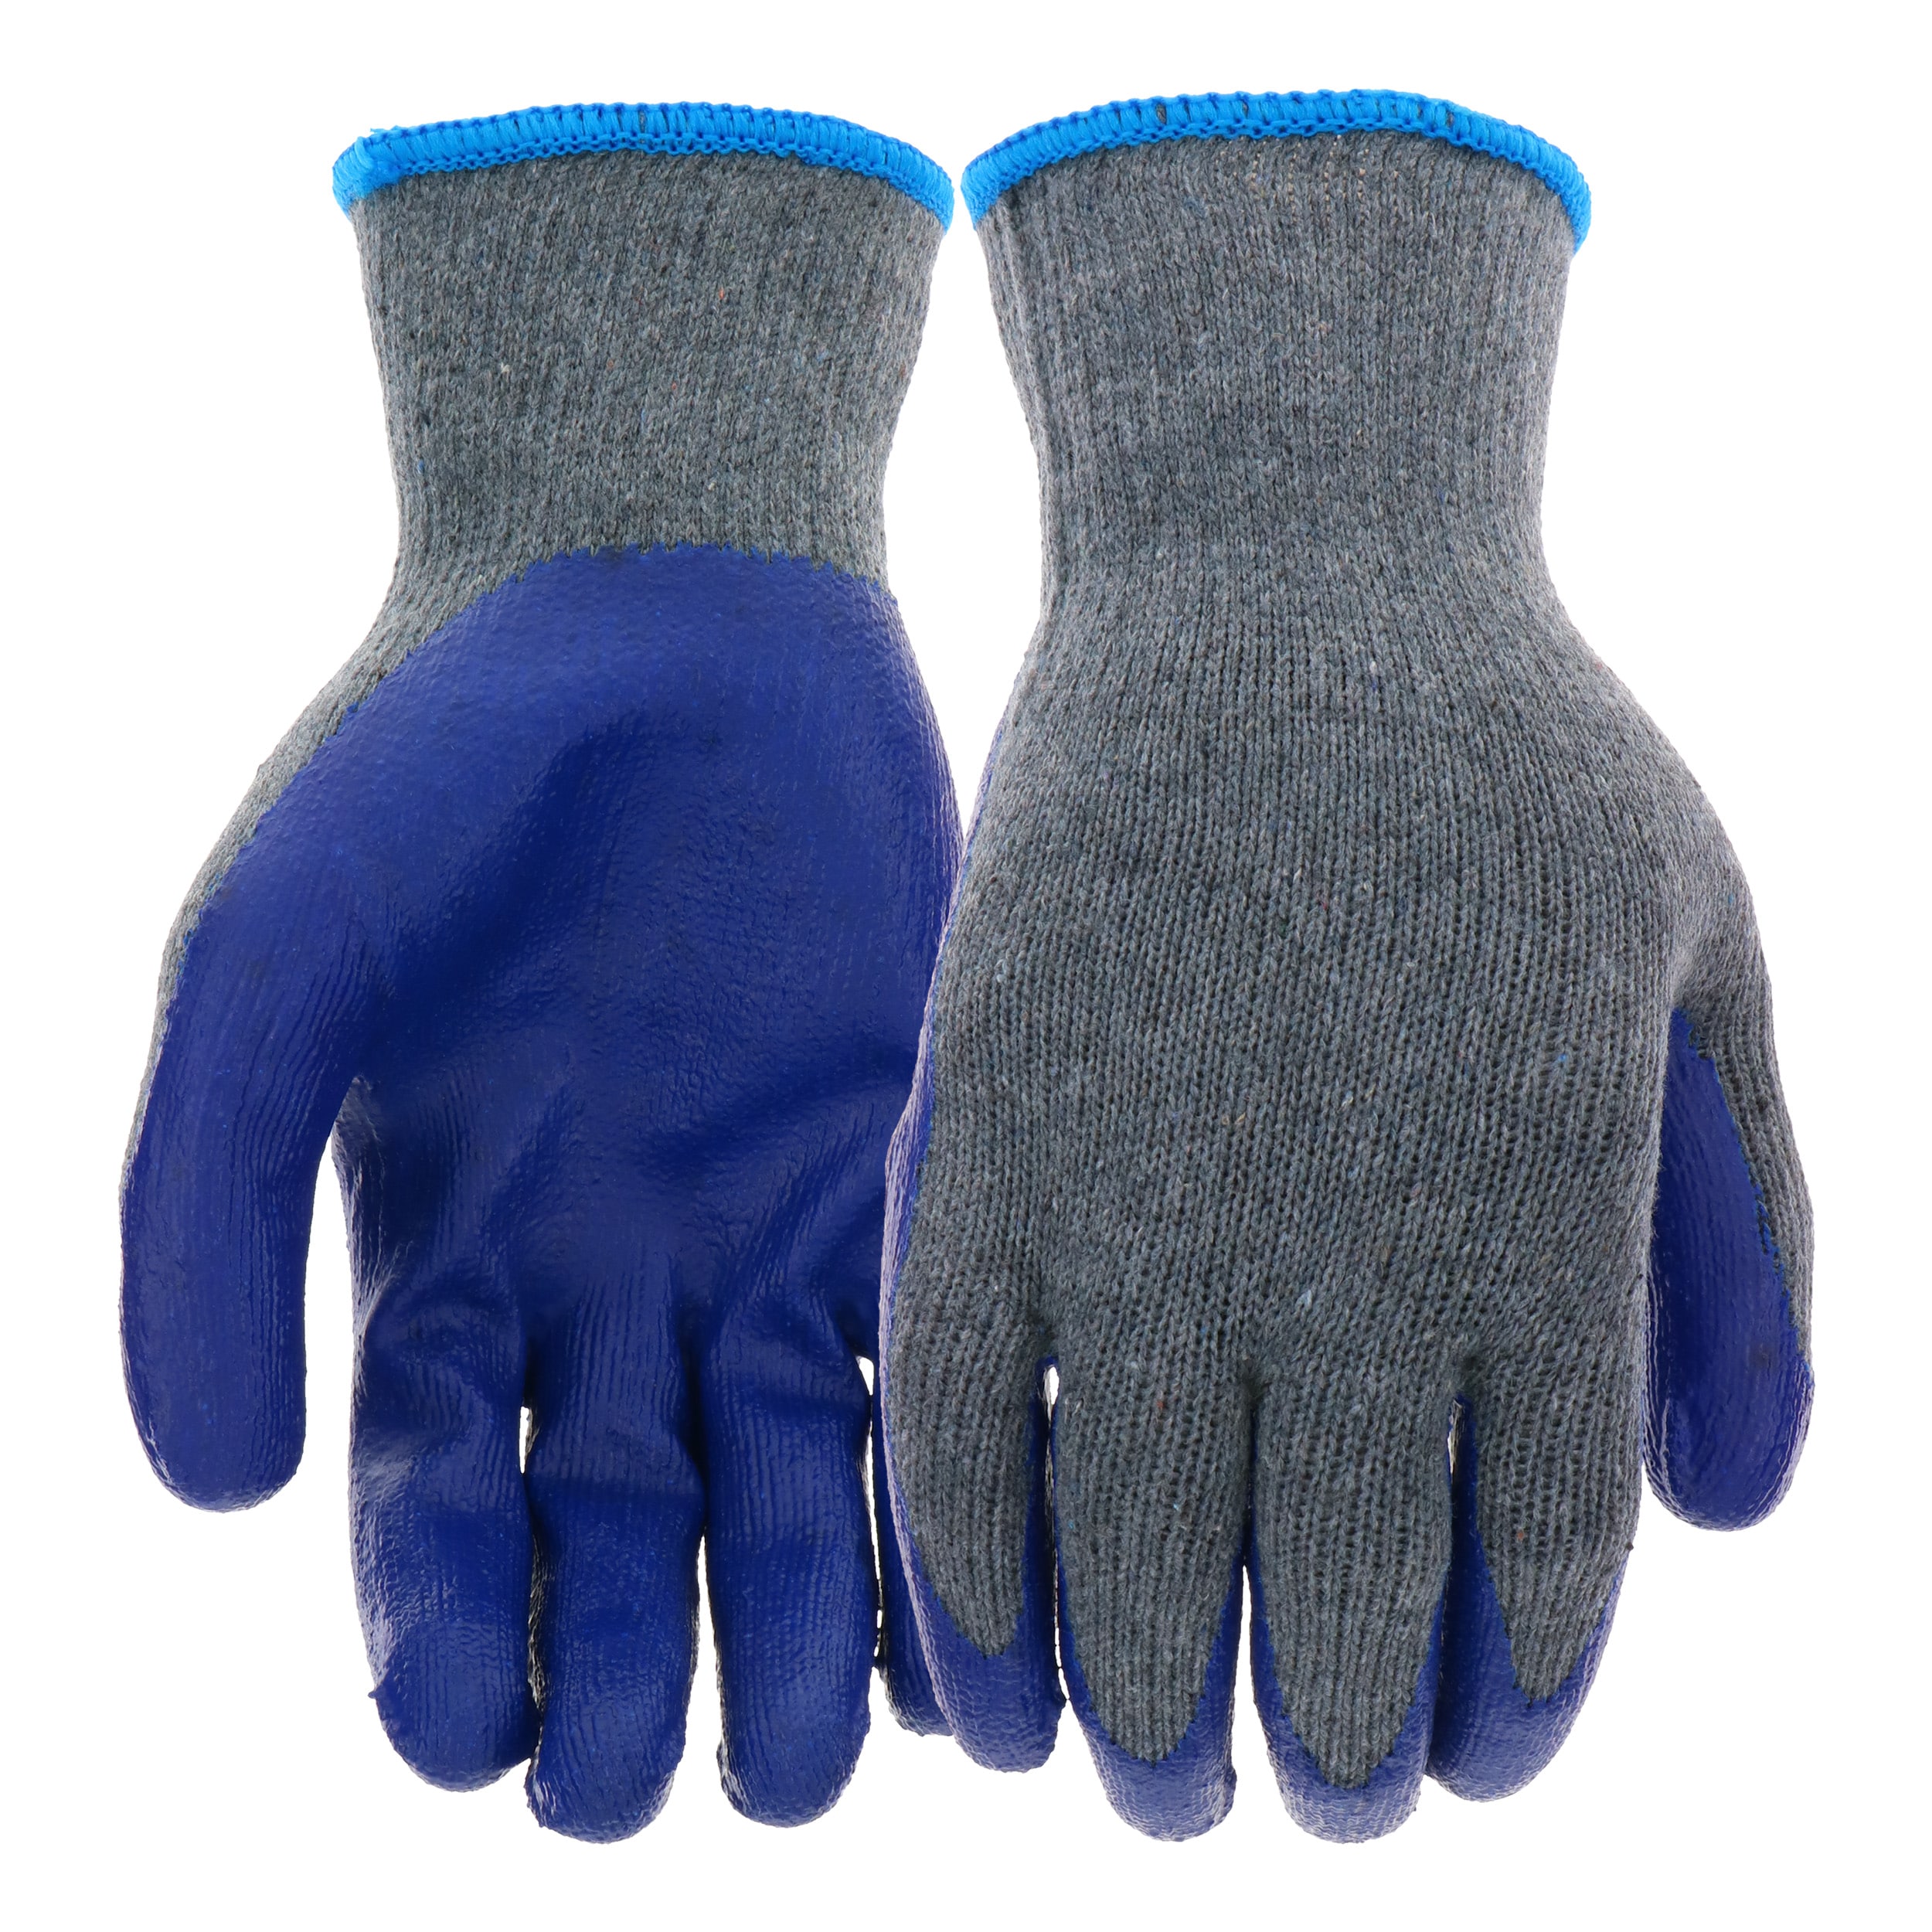 LATEX COATED POLY COTTON GARDENING GLOVES MAINTENANCE CONSTRUCTION CAR 3 SIZES 